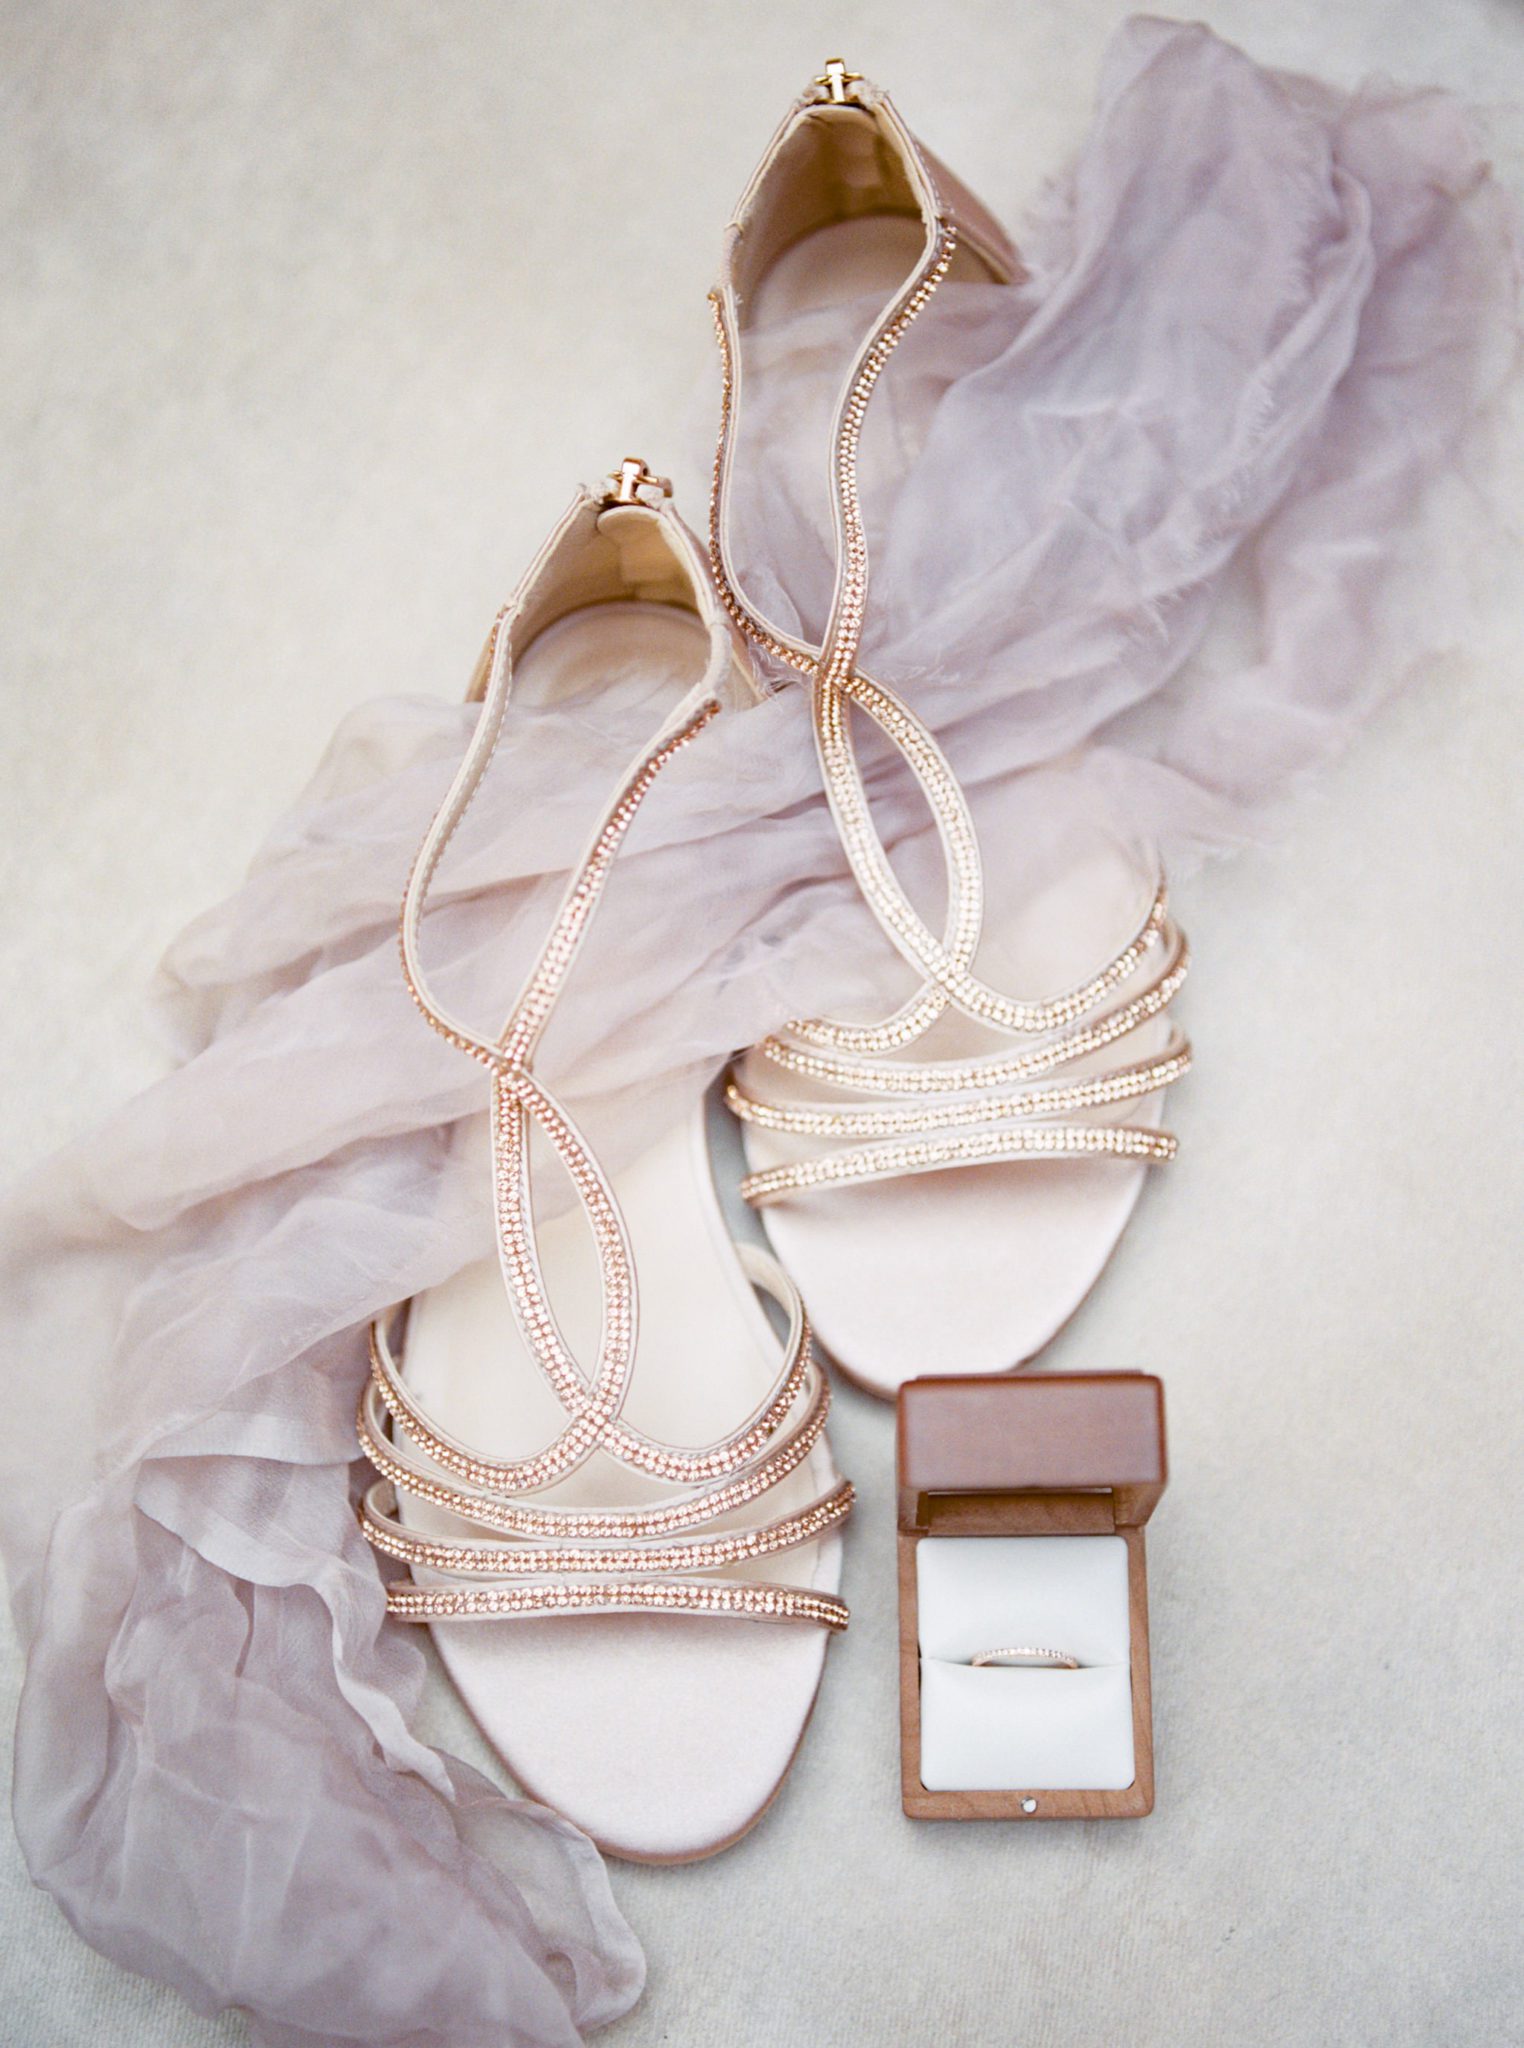 Rose gold bridal heels styled with lavender silk ribbon